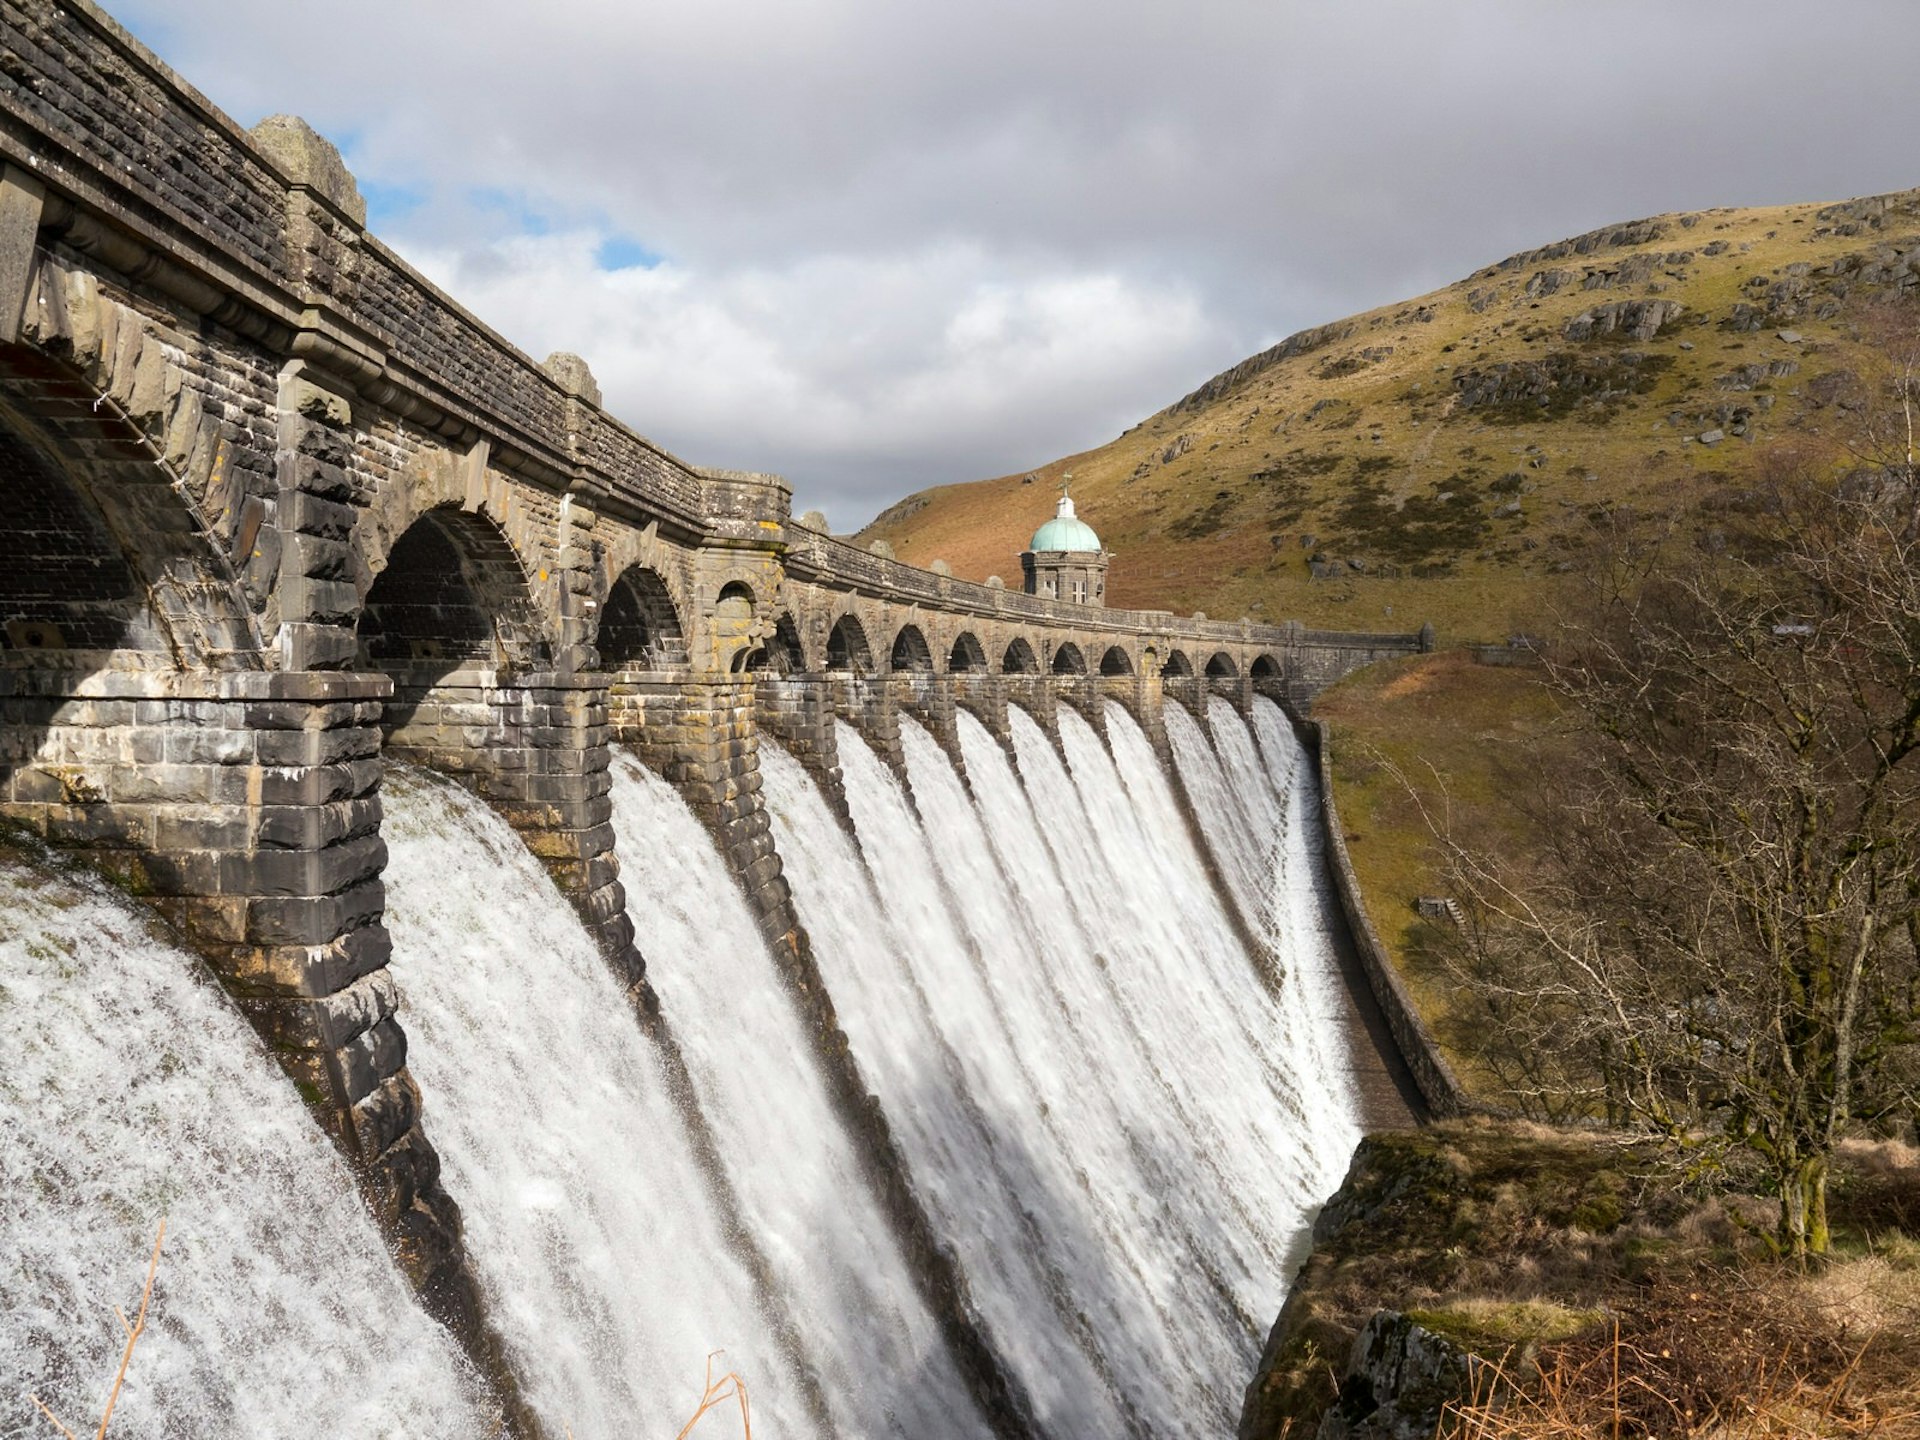 Water cascades down from Craig Goch dam in the Elan Valley, North Wales © Stephen Rees / Lonely Planet